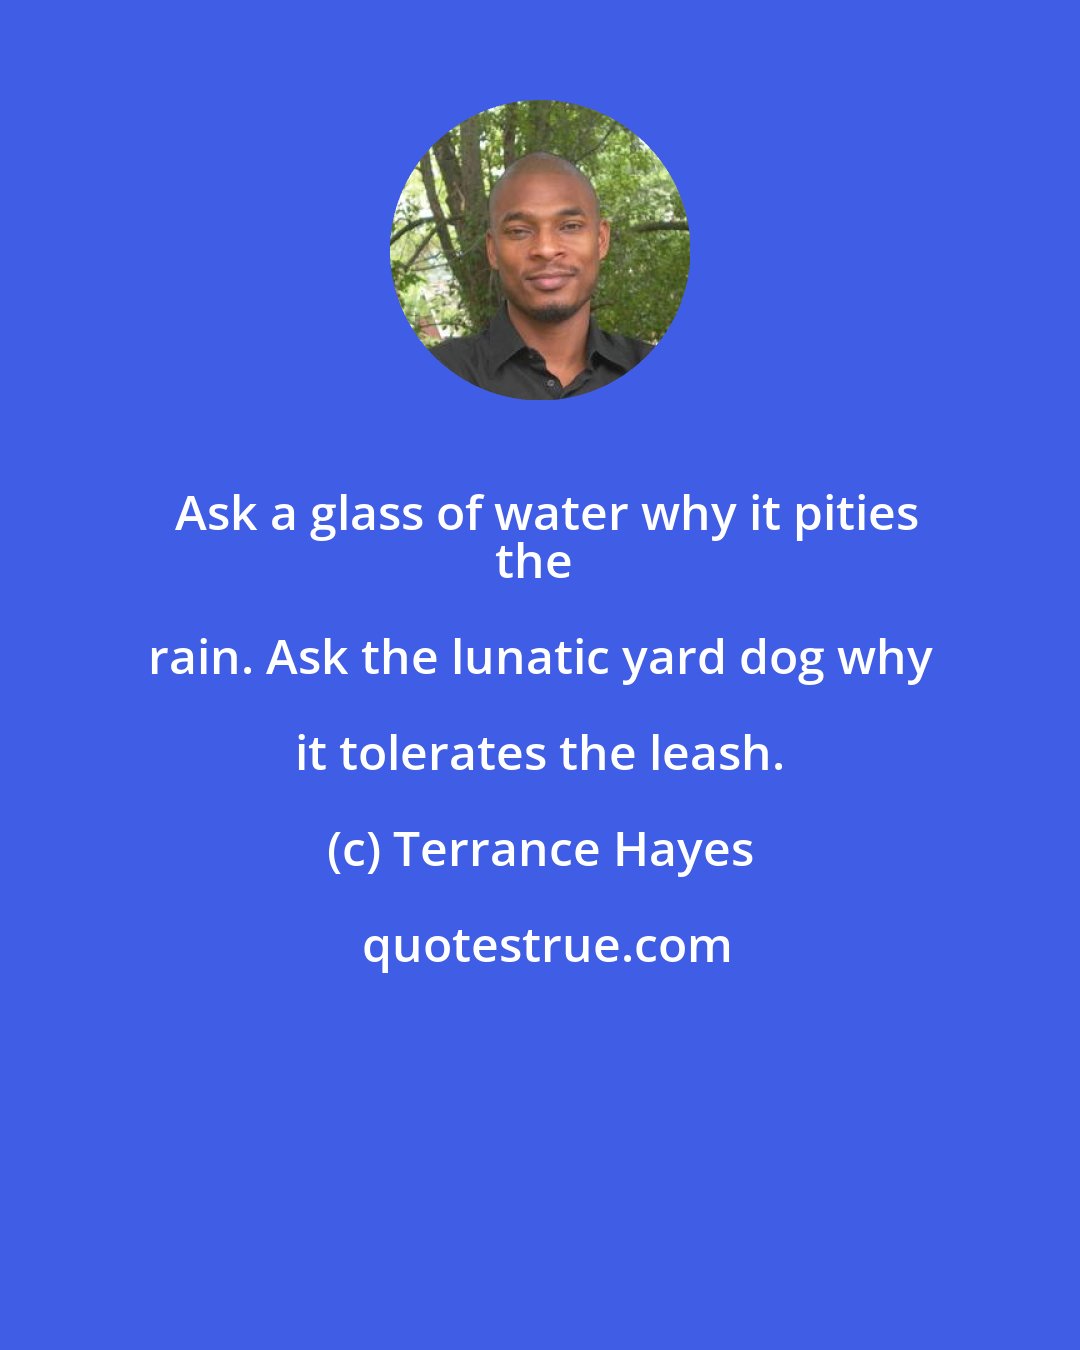 Terrance Hayes: Ask a glass of water why it pities
the rain. Ask the lunatic yard dog why it tolerates the leash.